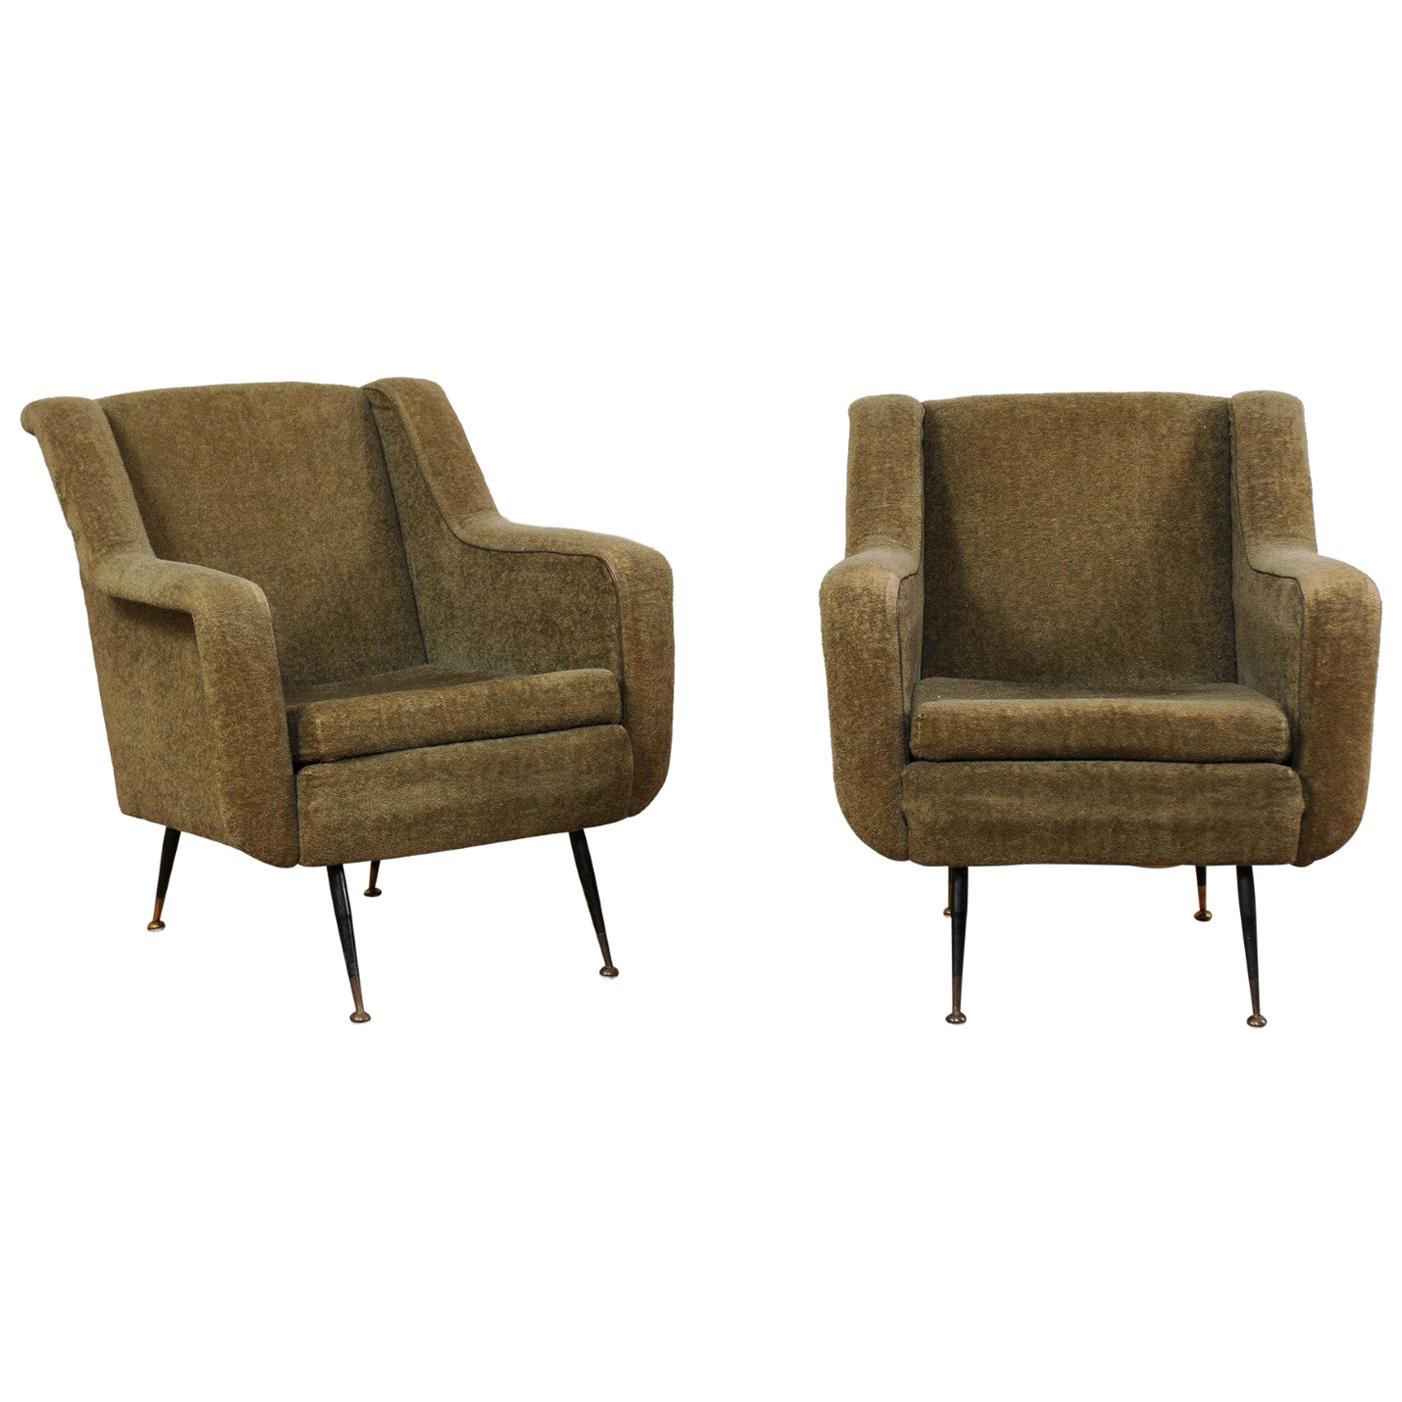 Pair of Mid-Century Modern Upholstered Club Chairs from Italy with Iron Legs